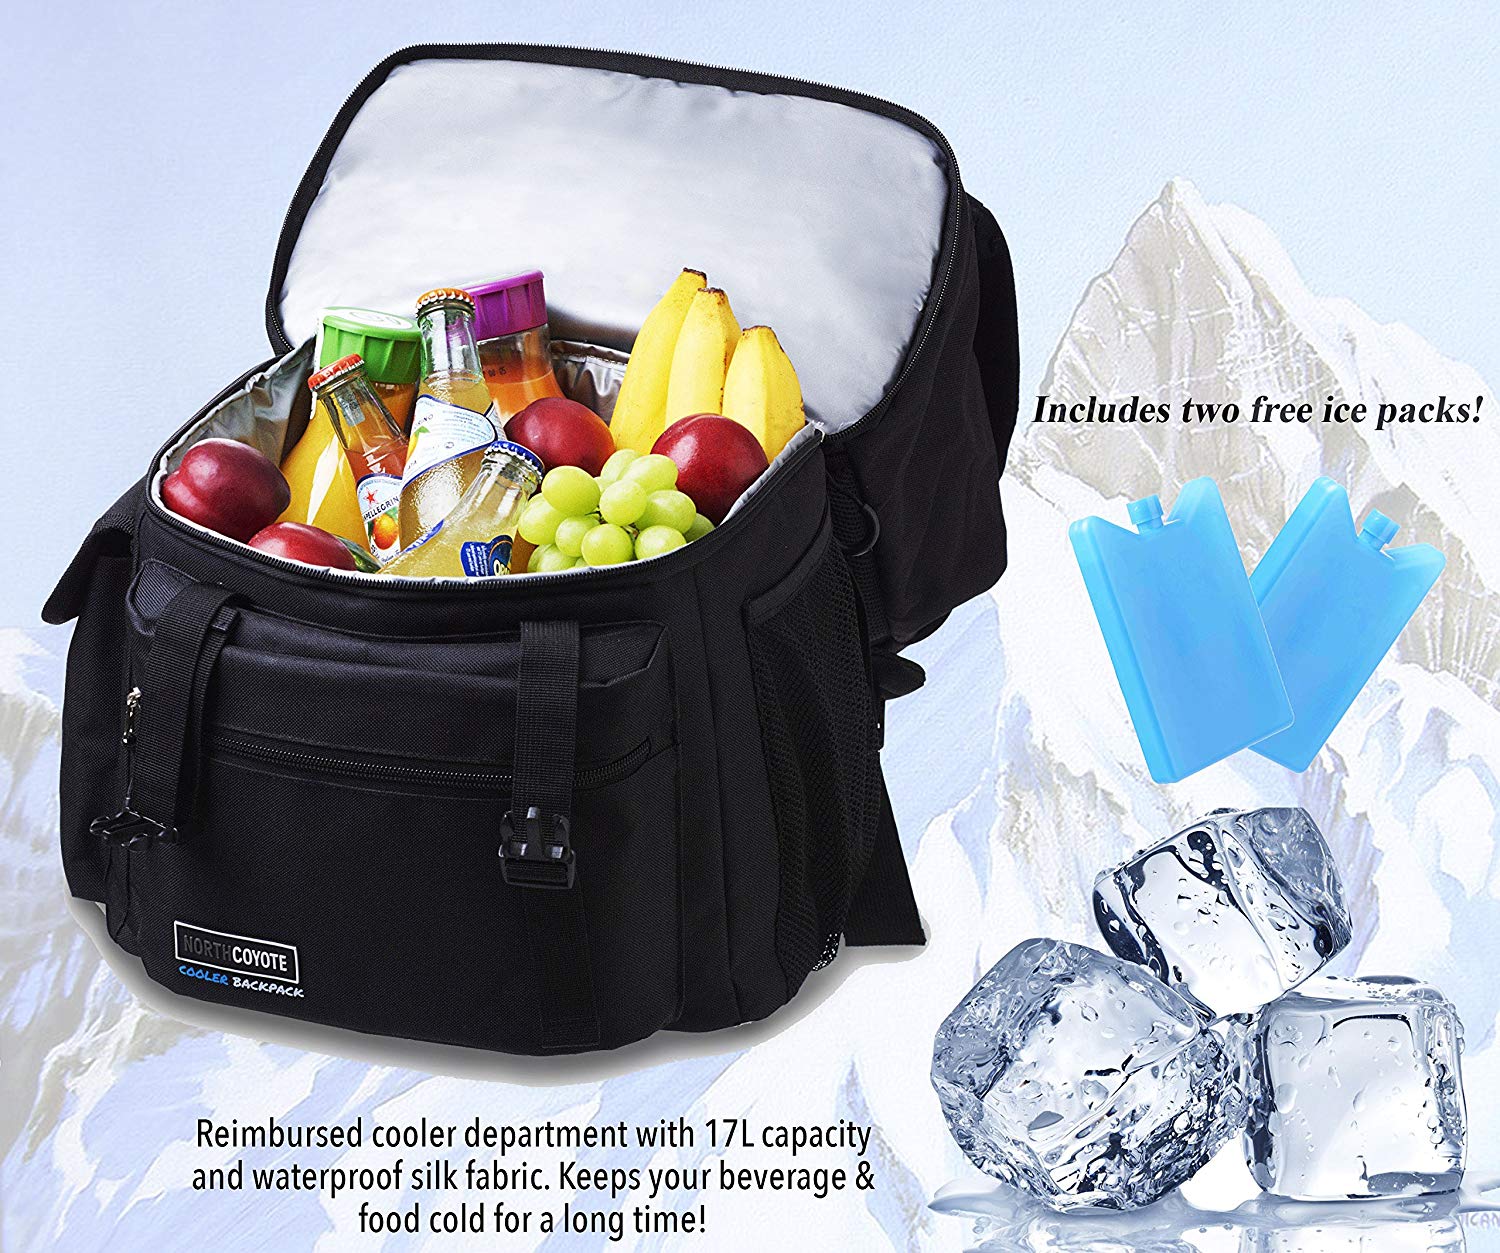 Top 10 Best Backpack Coolers in 2022 Reviews & Buying Guide